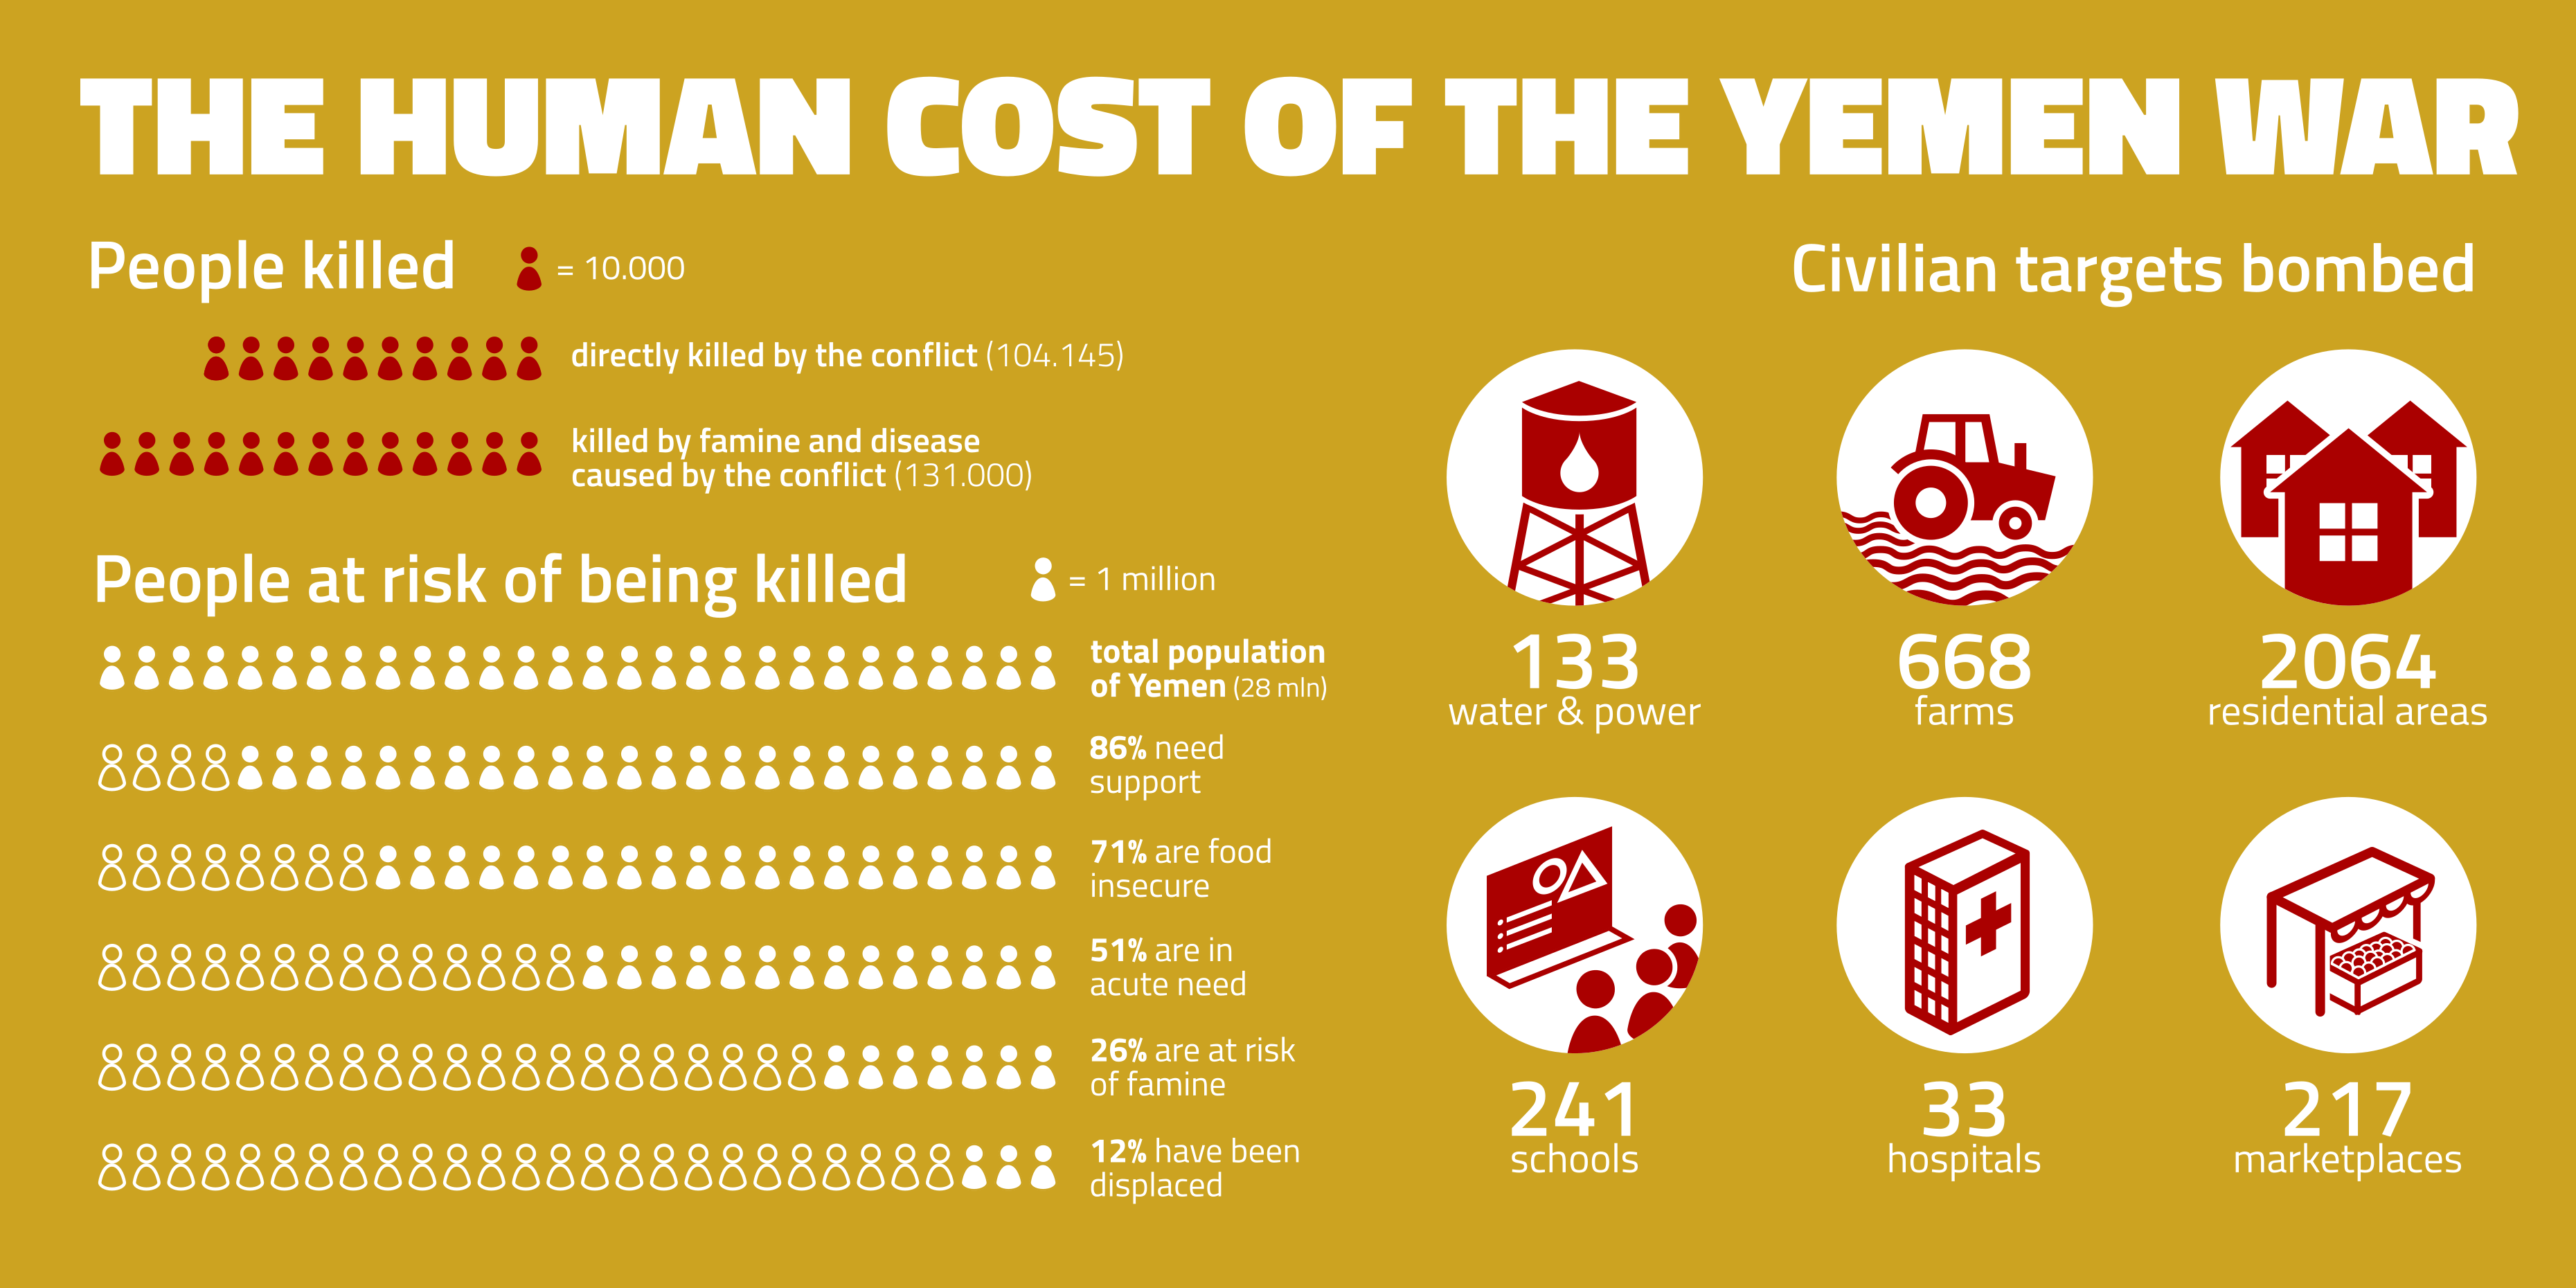 A panel from our infographic, detailing the human cost of the war.